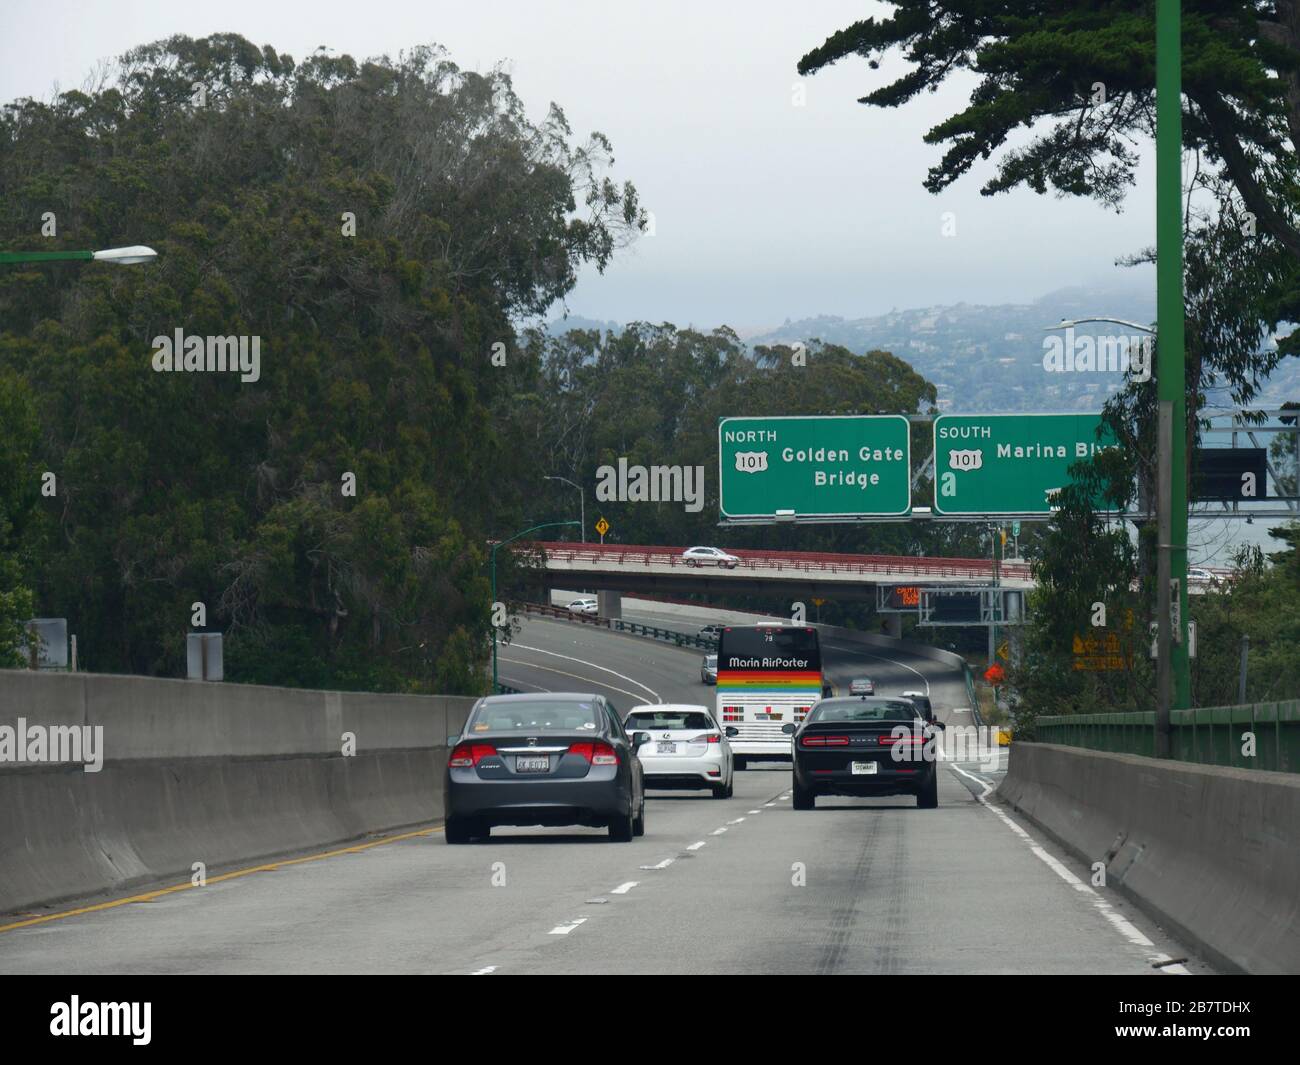 San Francisco, California-July 2018: Vehicles travel on the road with directional signs to the Golden Gate bridge and Marina Boulevard in San Francisc Stock Photo